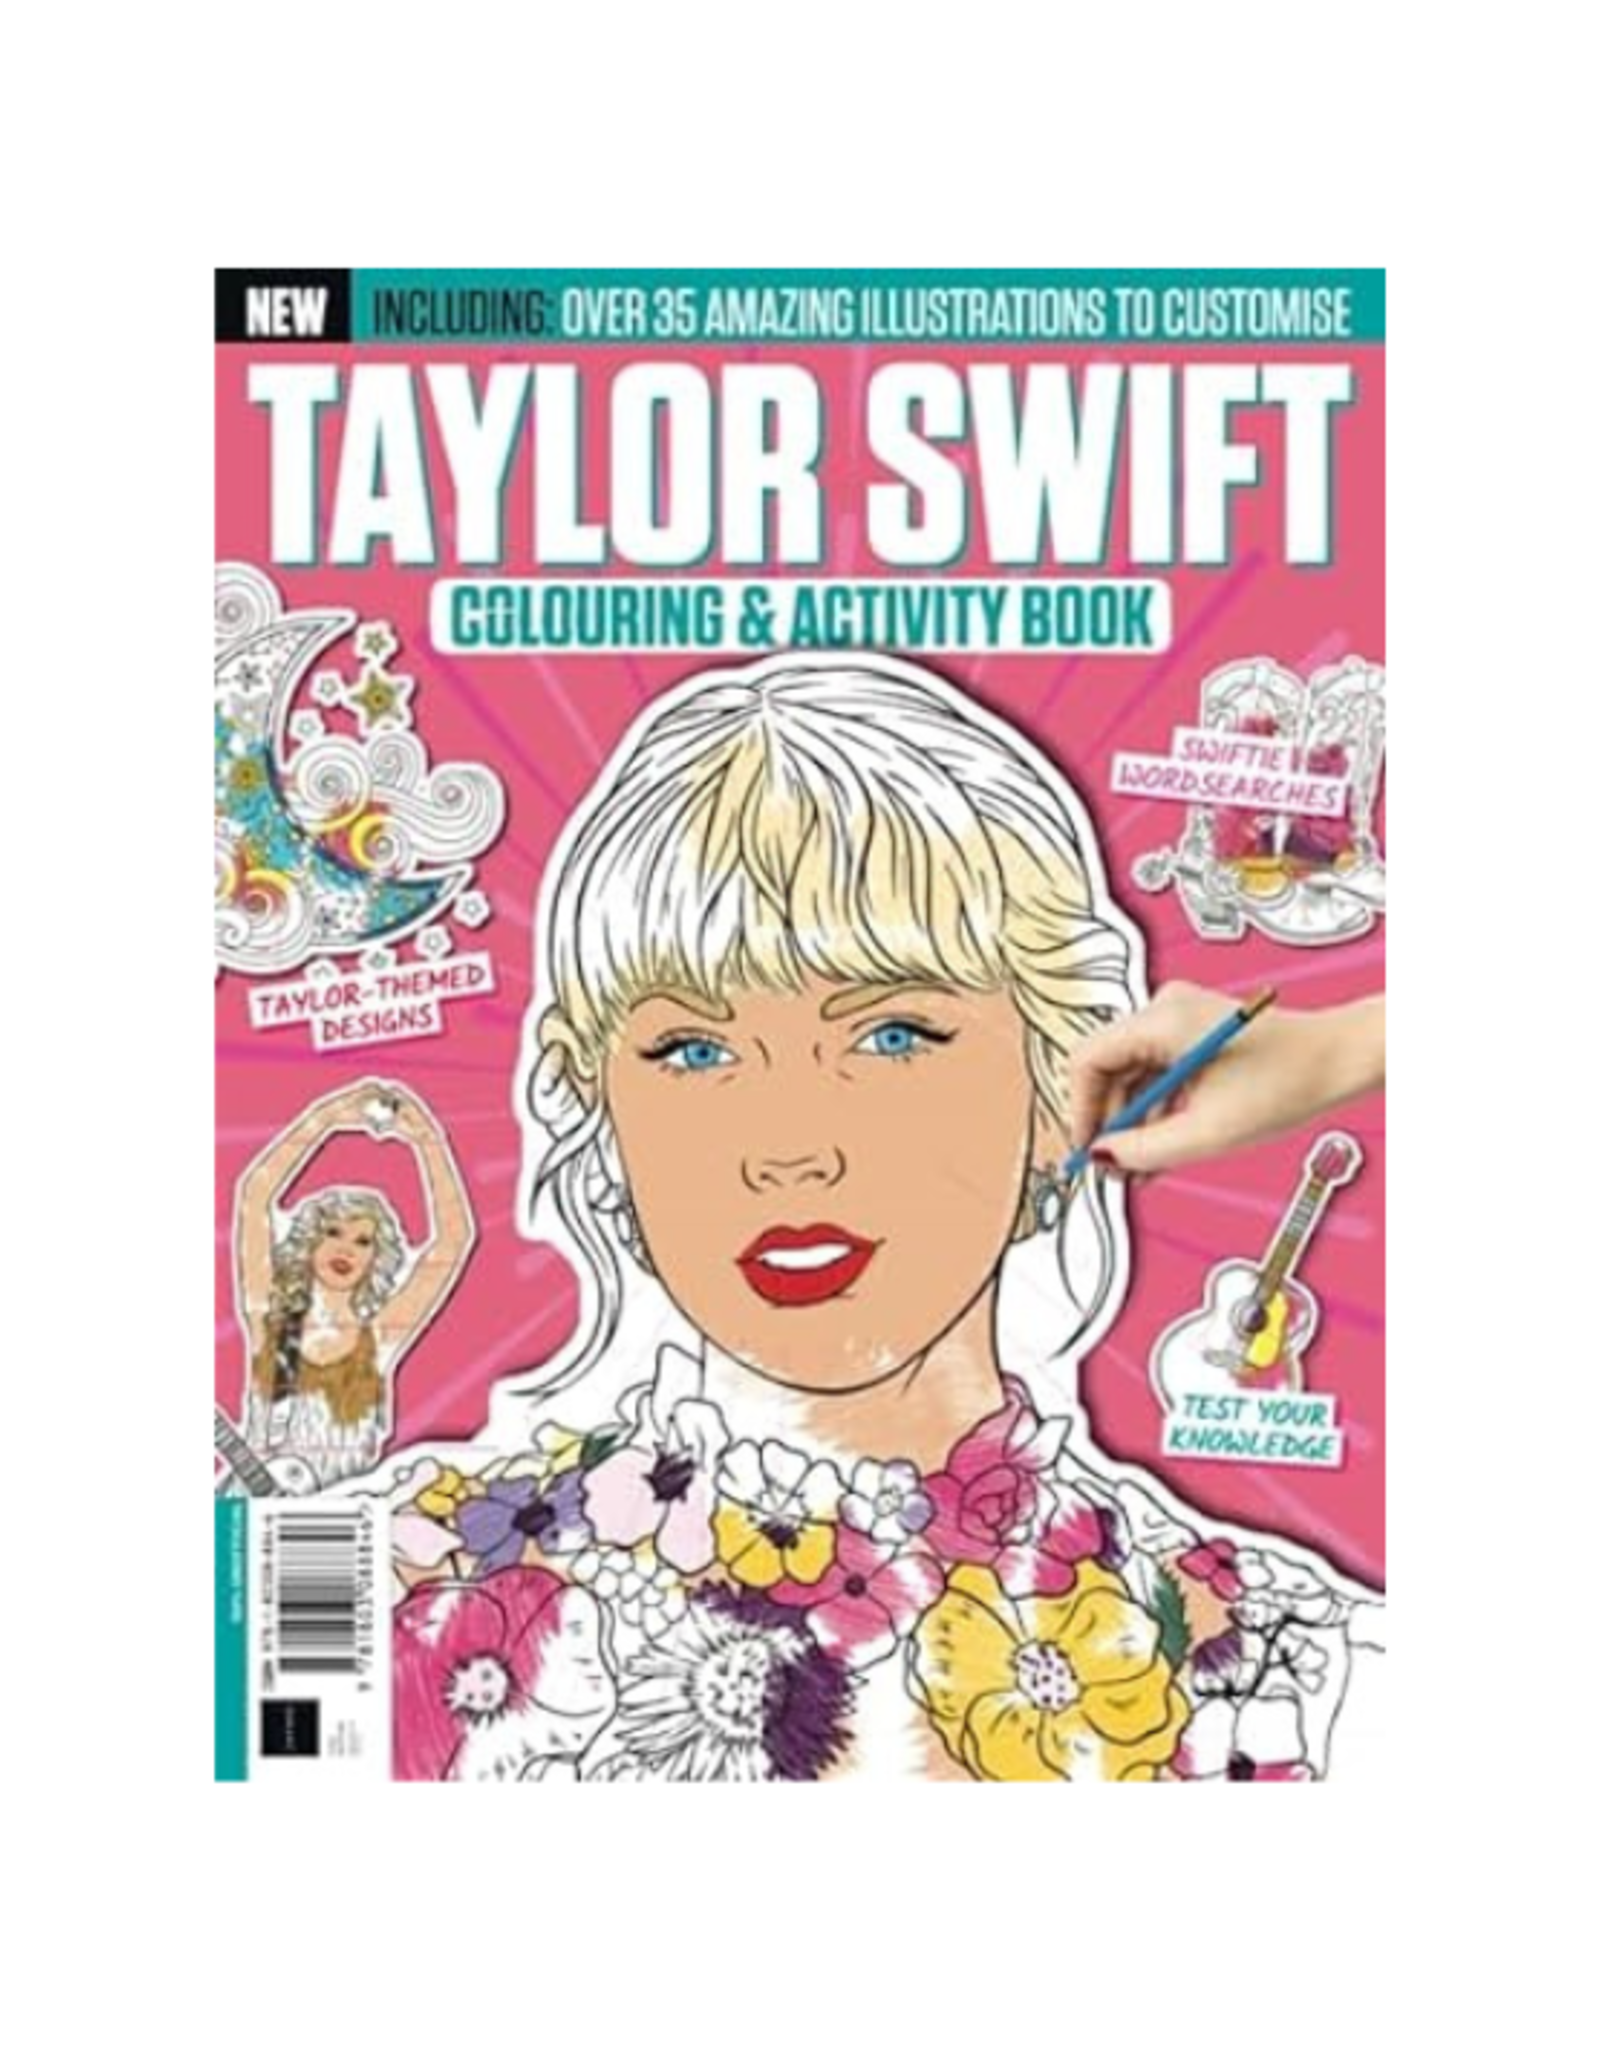 Taylor Swift Coloring Book & Activity Book